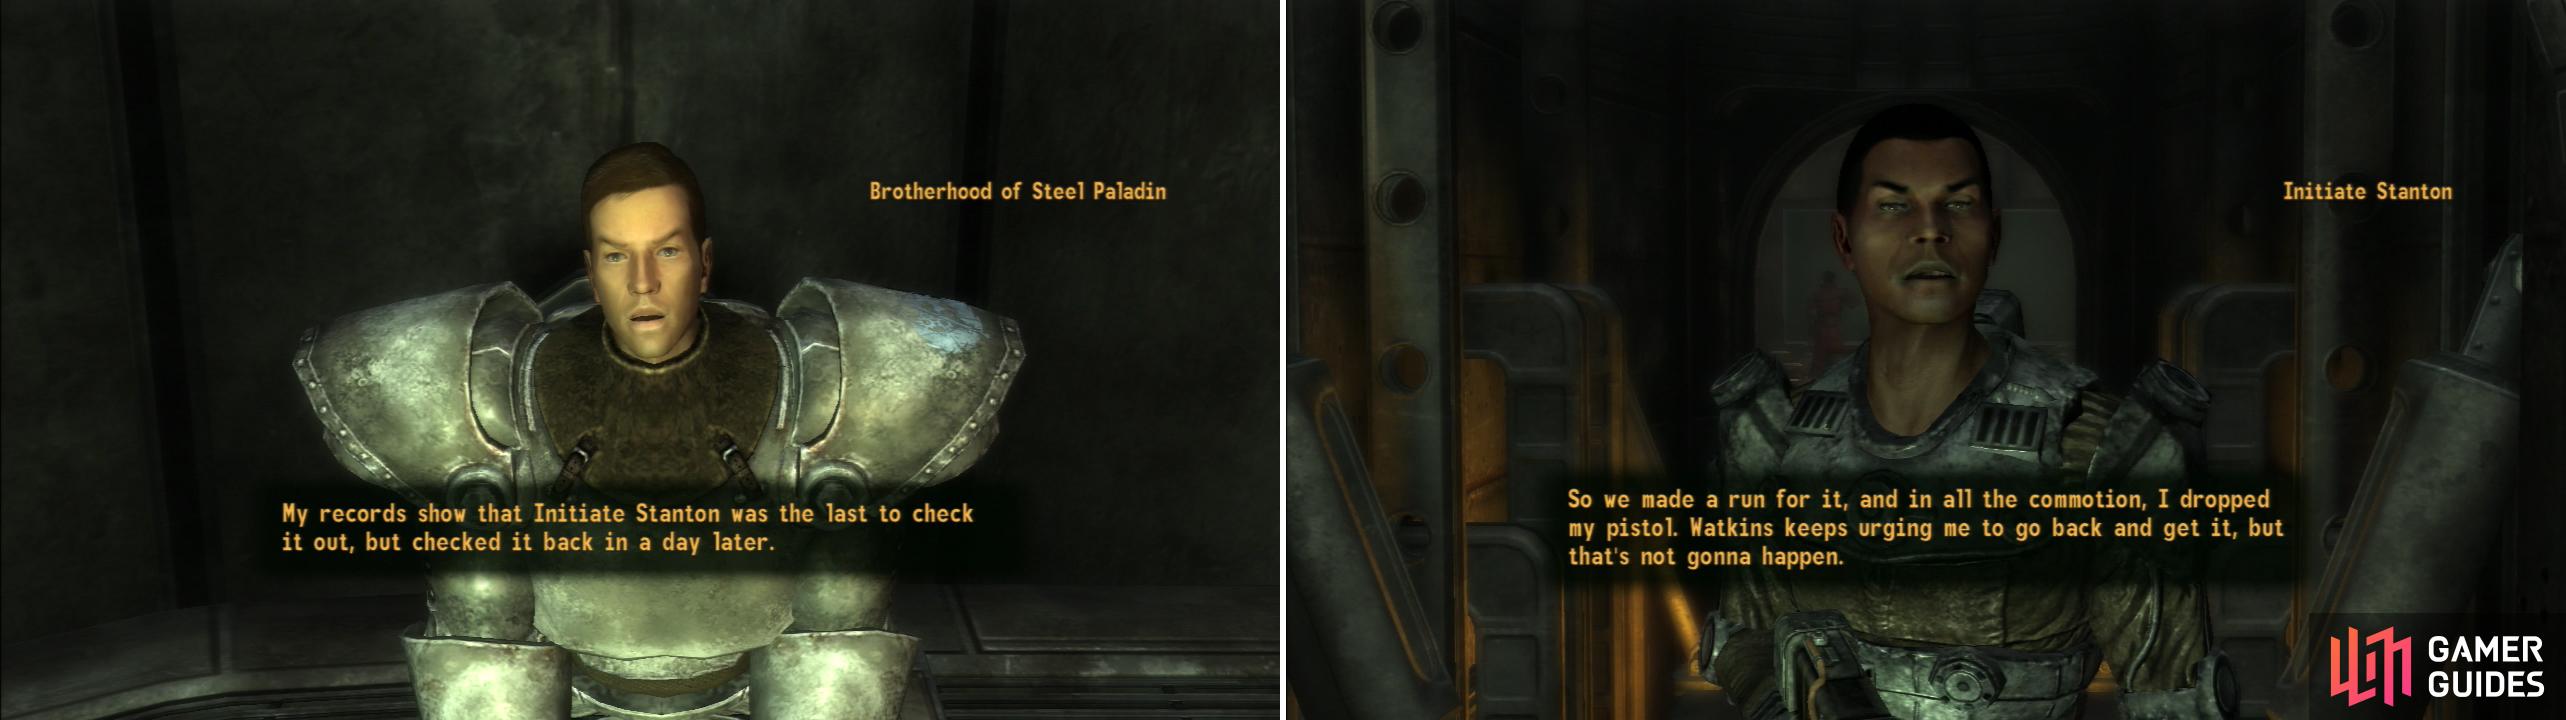 Talk to the overseeing Paladin at the shooting ranger to learn who had the Laser Pistol last (left). With this information, confront Initiate Stanton to get him to spill the beans (right).